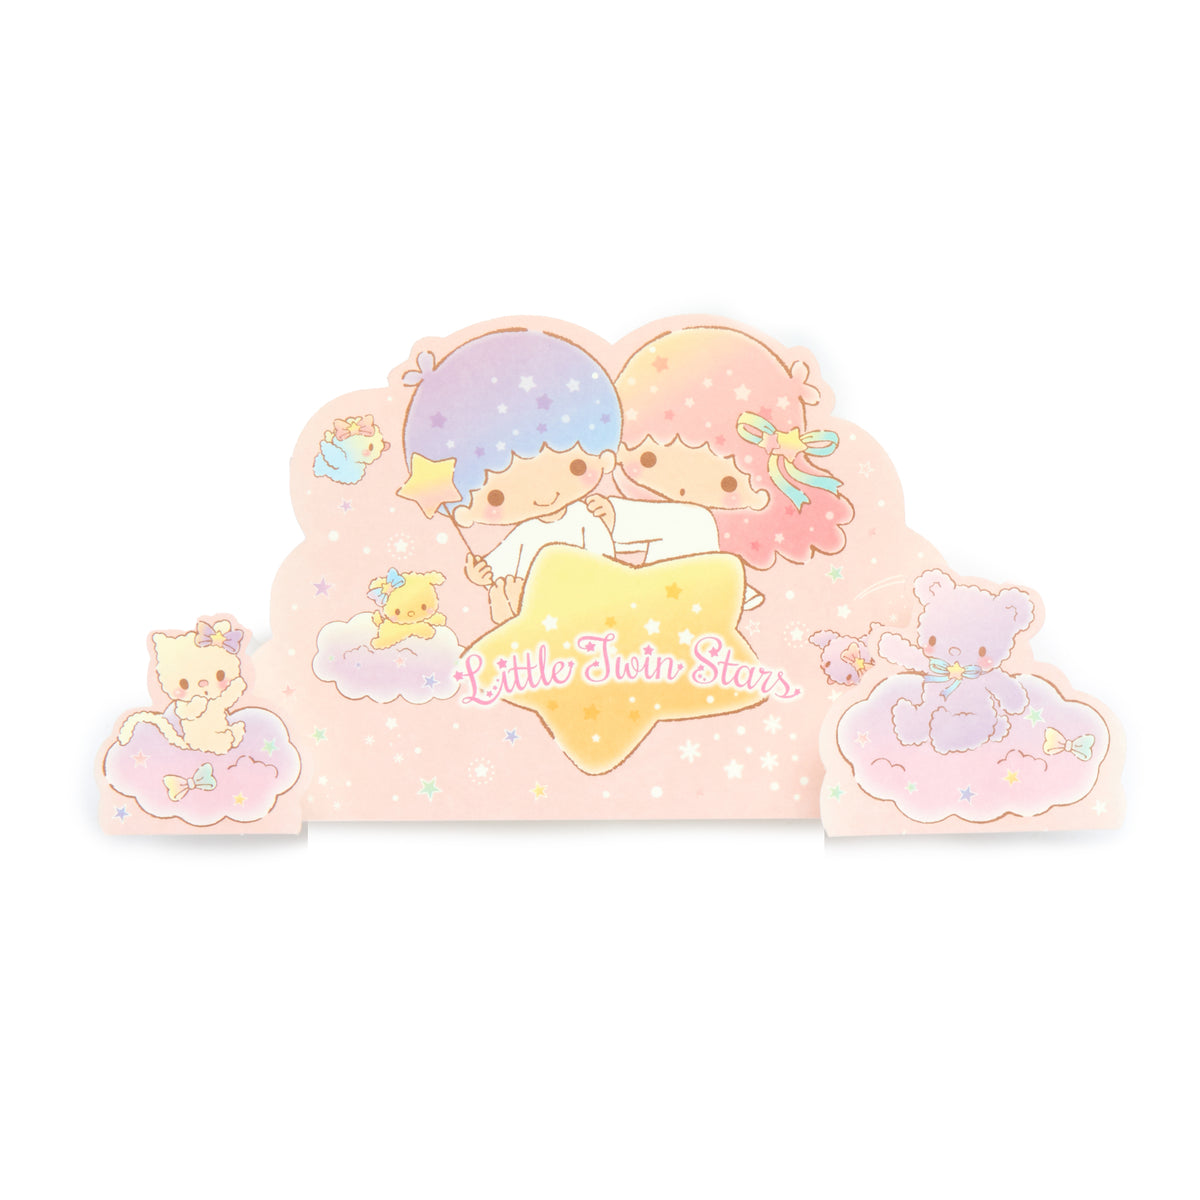 LittleTwinStars Stickers and Greeting Card Stationery Japan Original   